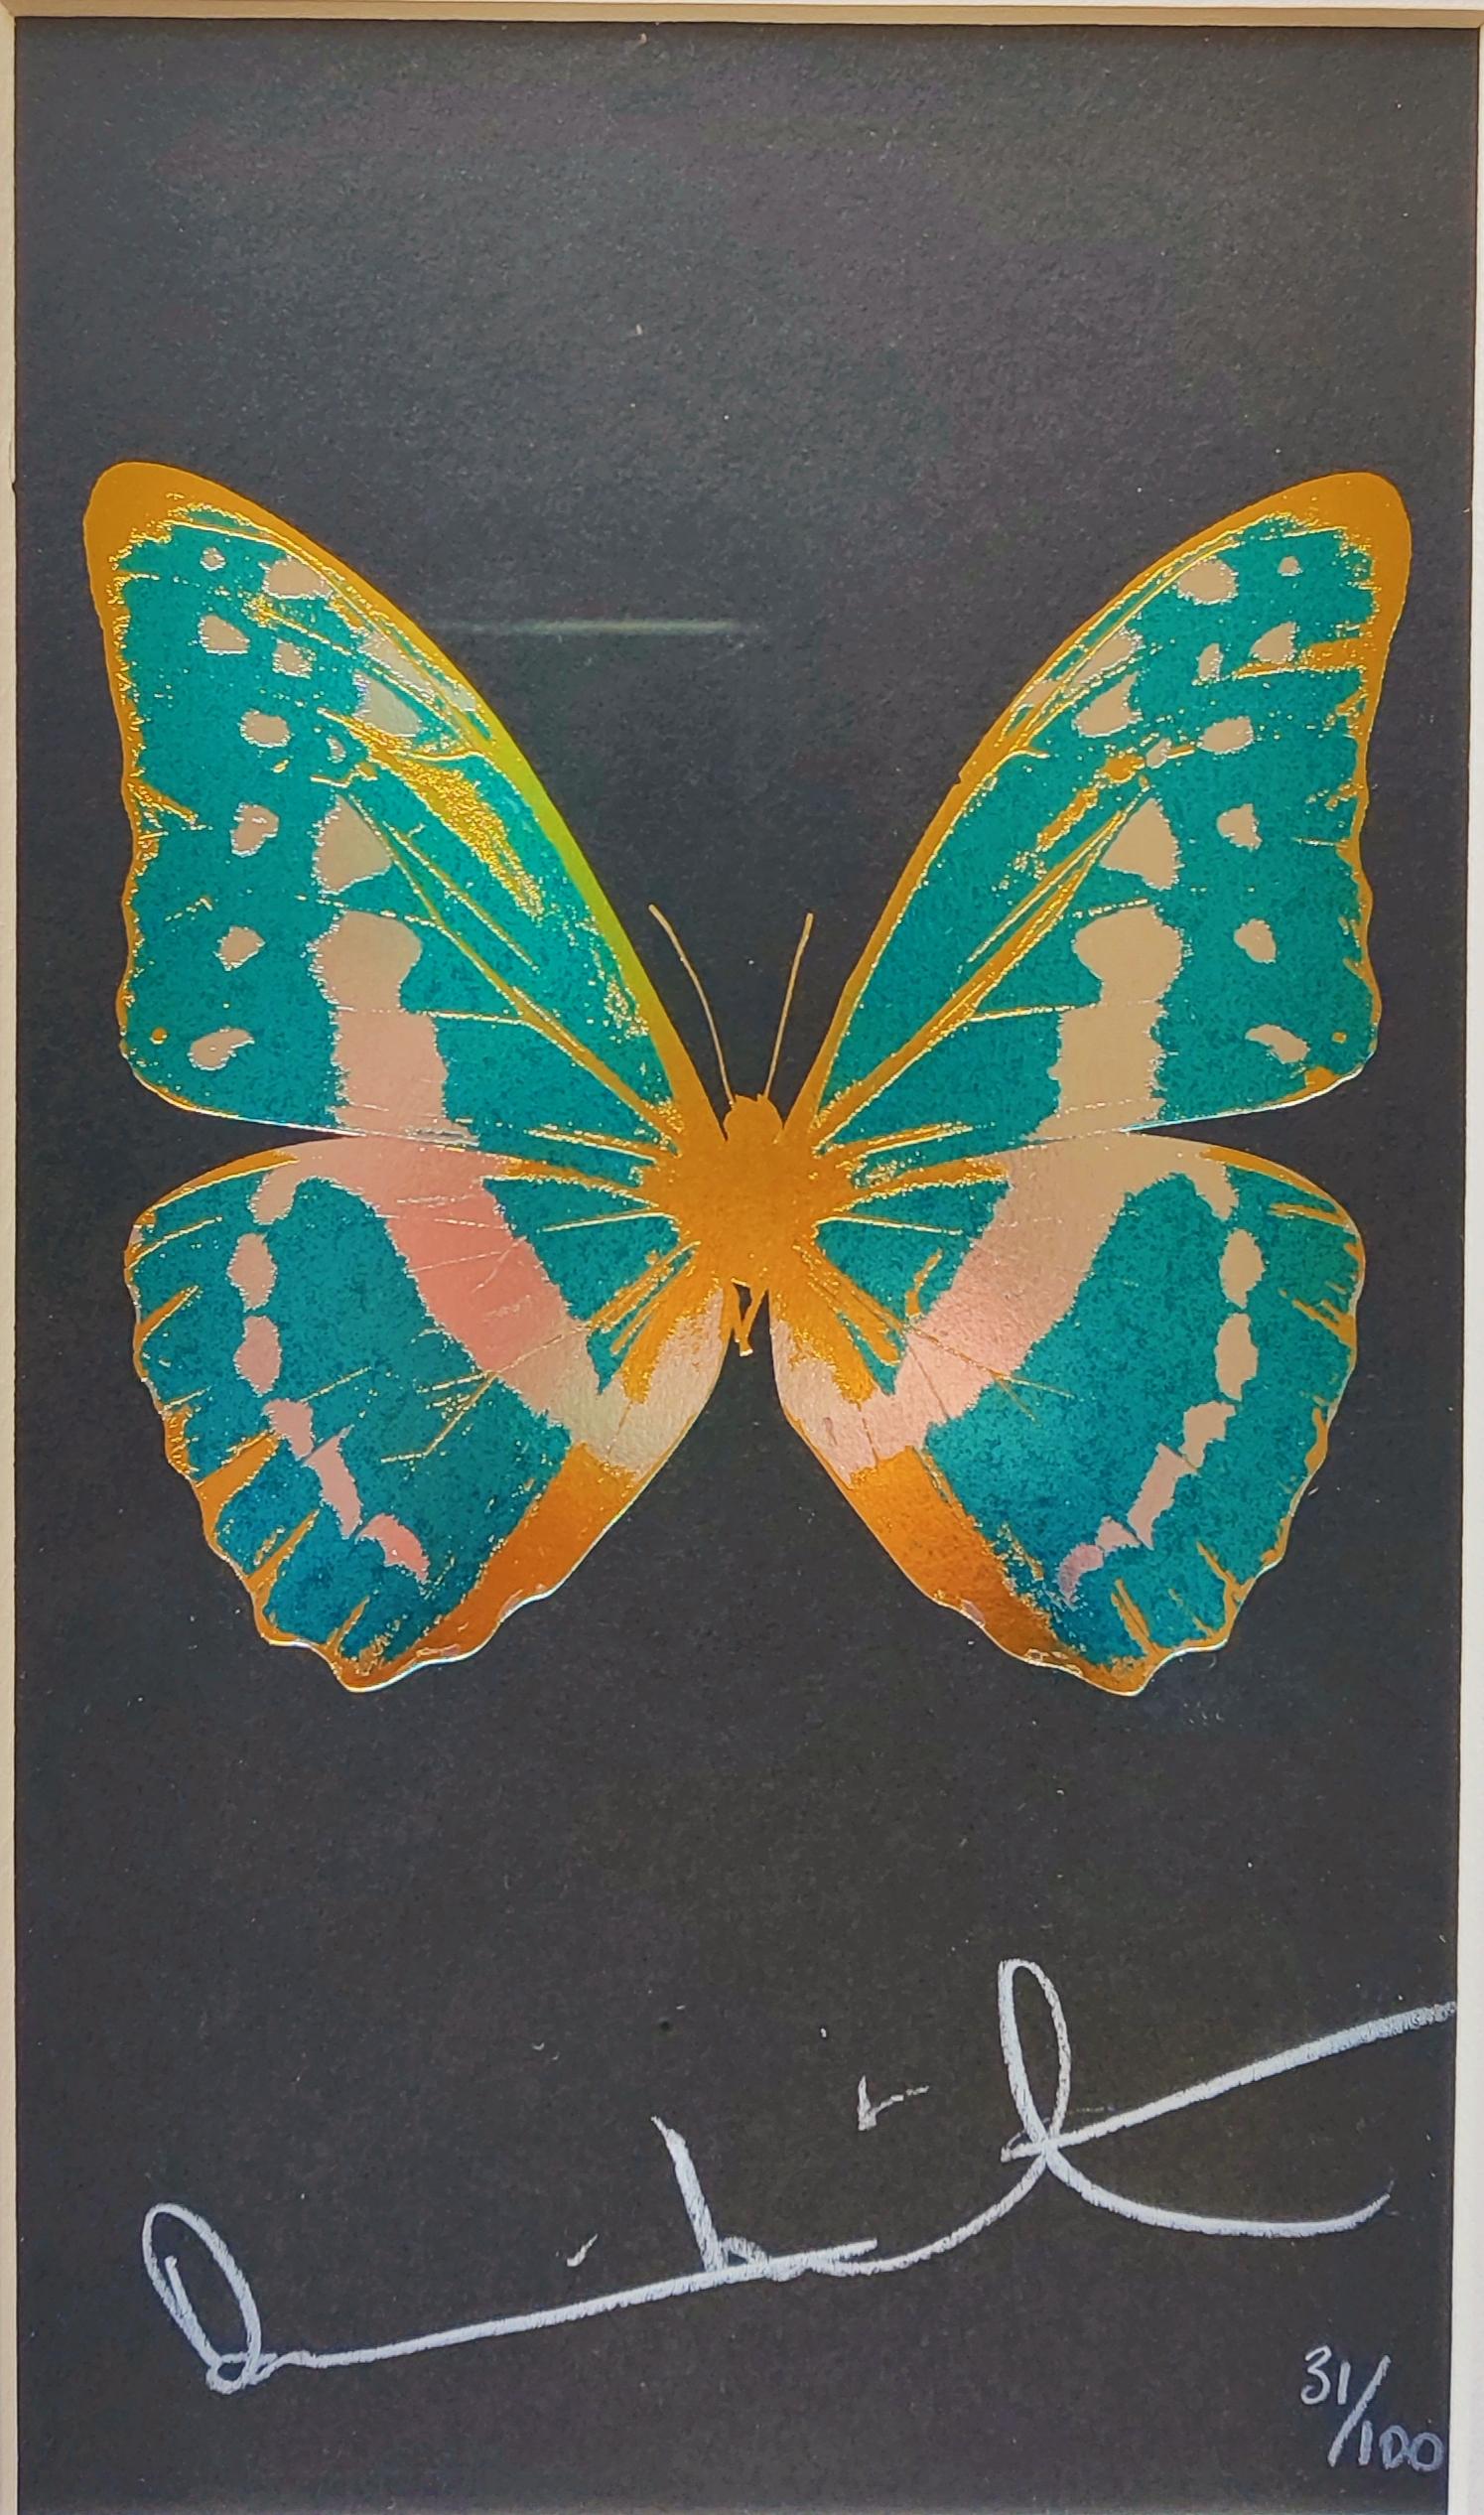 Damien Hirst -- Work from the Limited Edition Book "The Souls", 2011